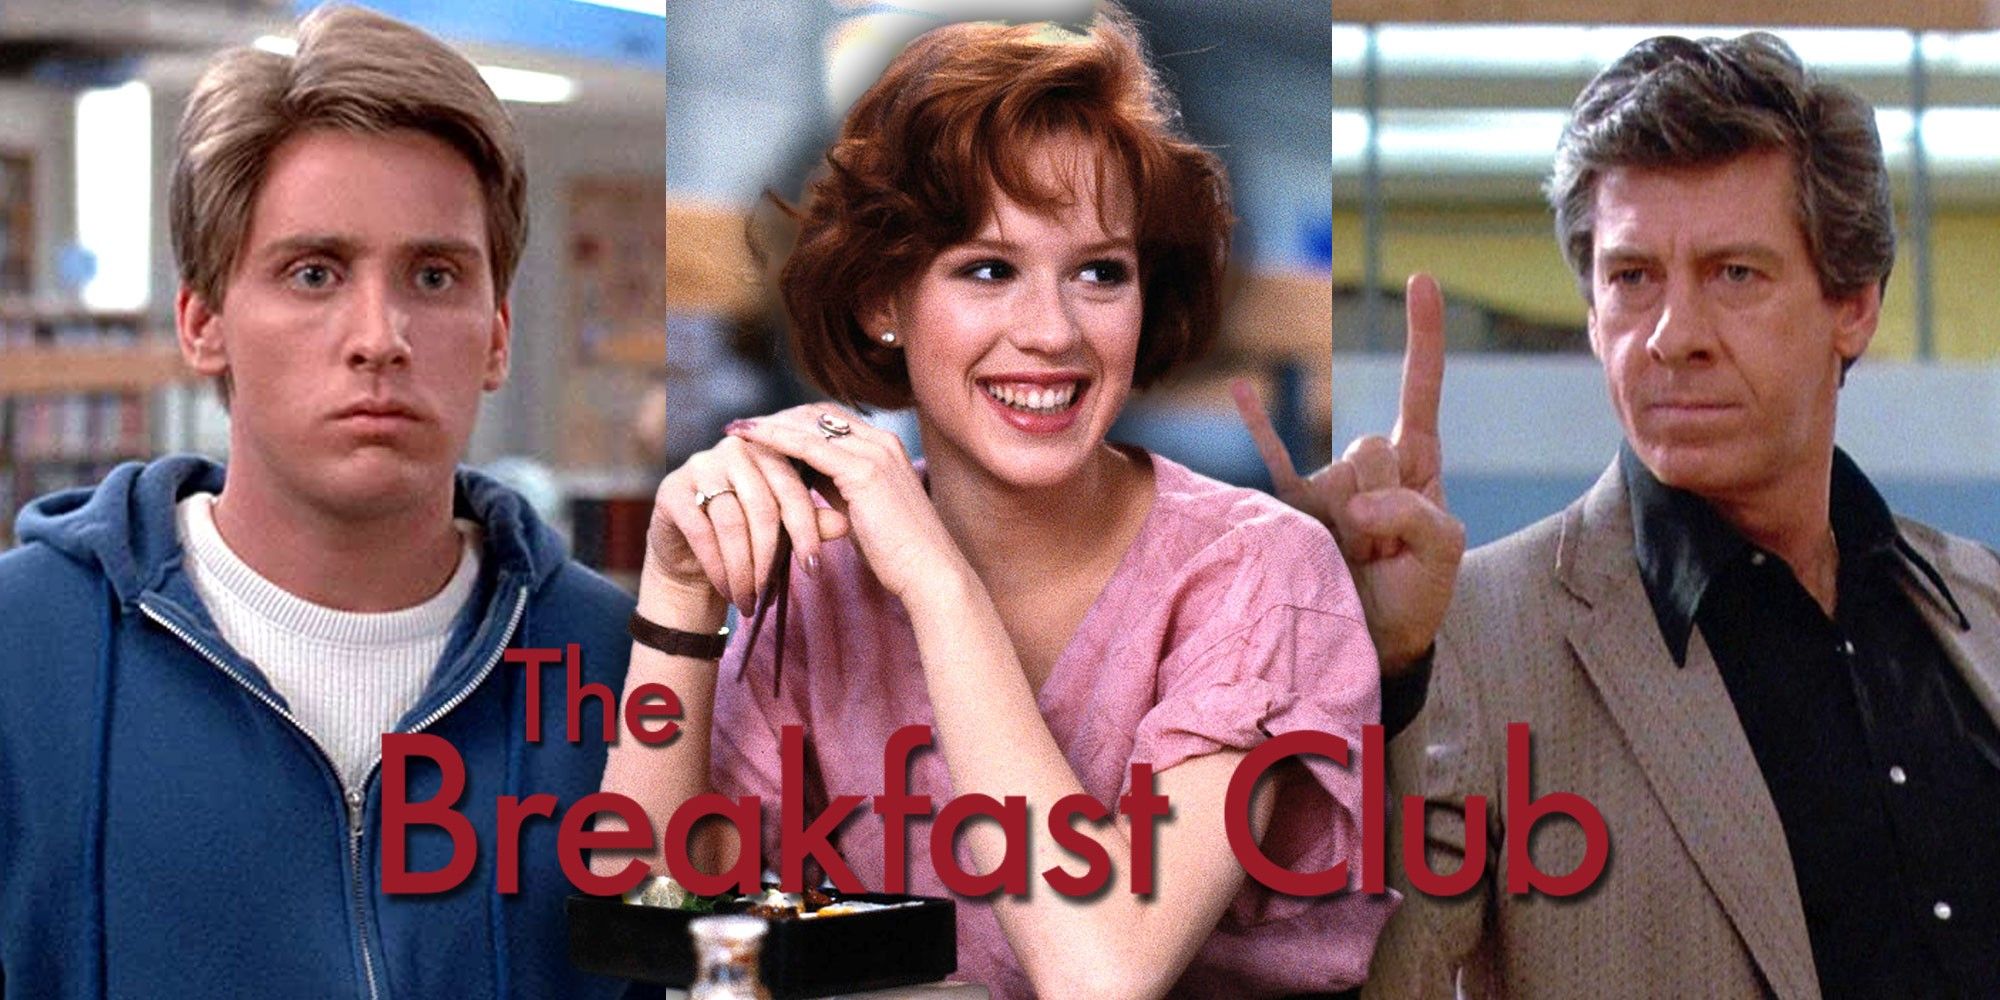 judd nelson the breakfast club quotes